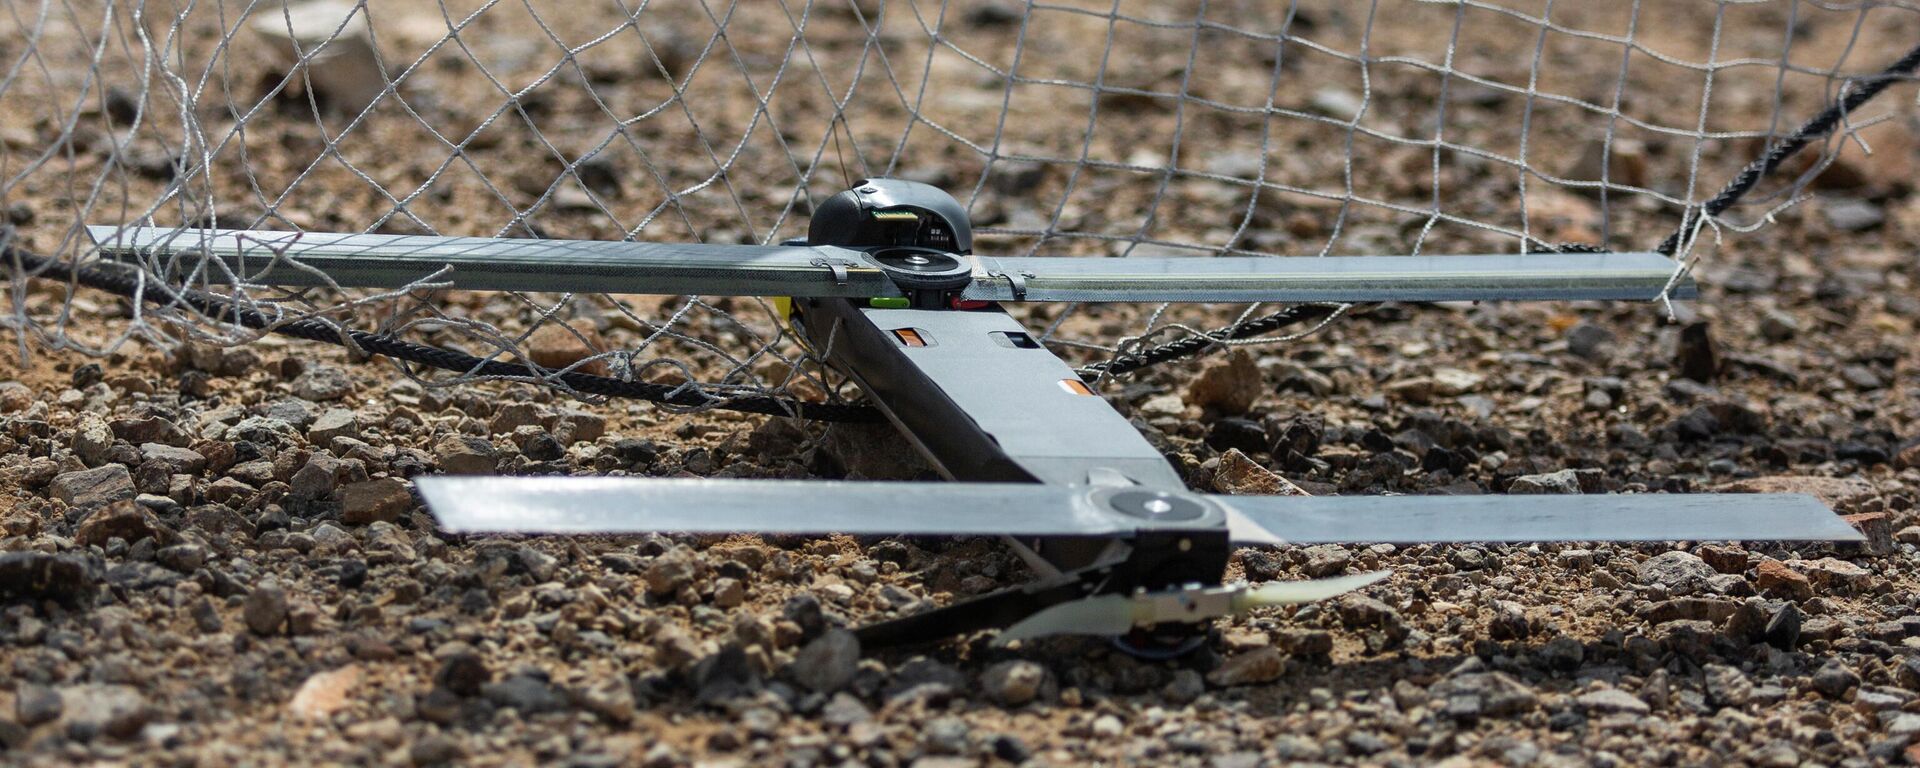 This image provided by the U.S. Marine Corps, shows a Switchblade 300 10C drone system being used as part of a training exercise at Marine Corps Air Ground Combat Center Twentynine Palms, Calif., on Sept. 24, 2021. - Sputnik International, 1920, 07.05.2022